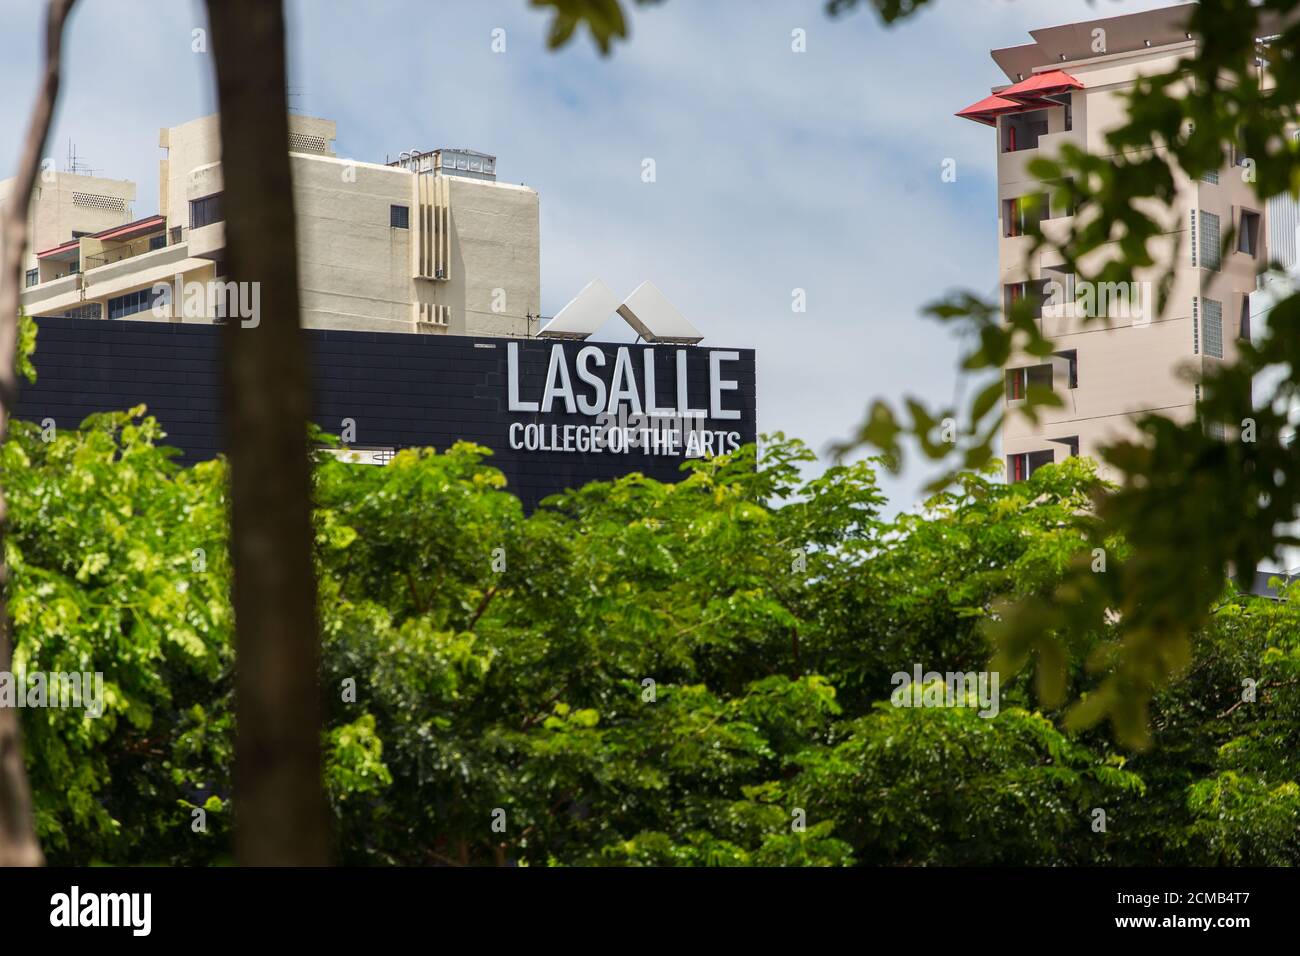 LASALLE College of the Arts signage, Singapore. Stock Photo